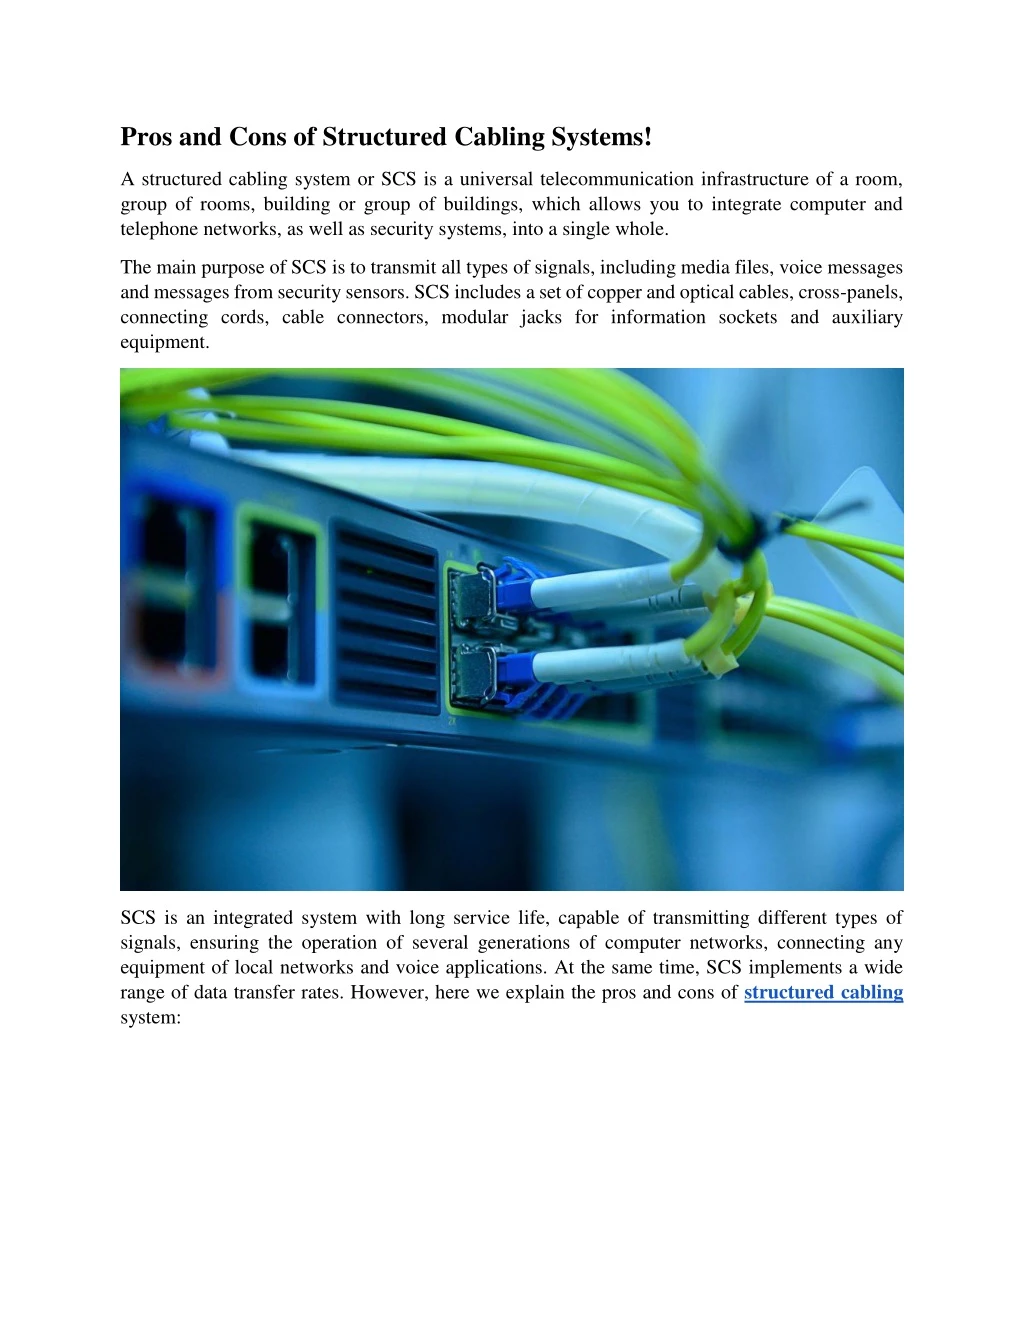 pros and cons of structured cabling systems